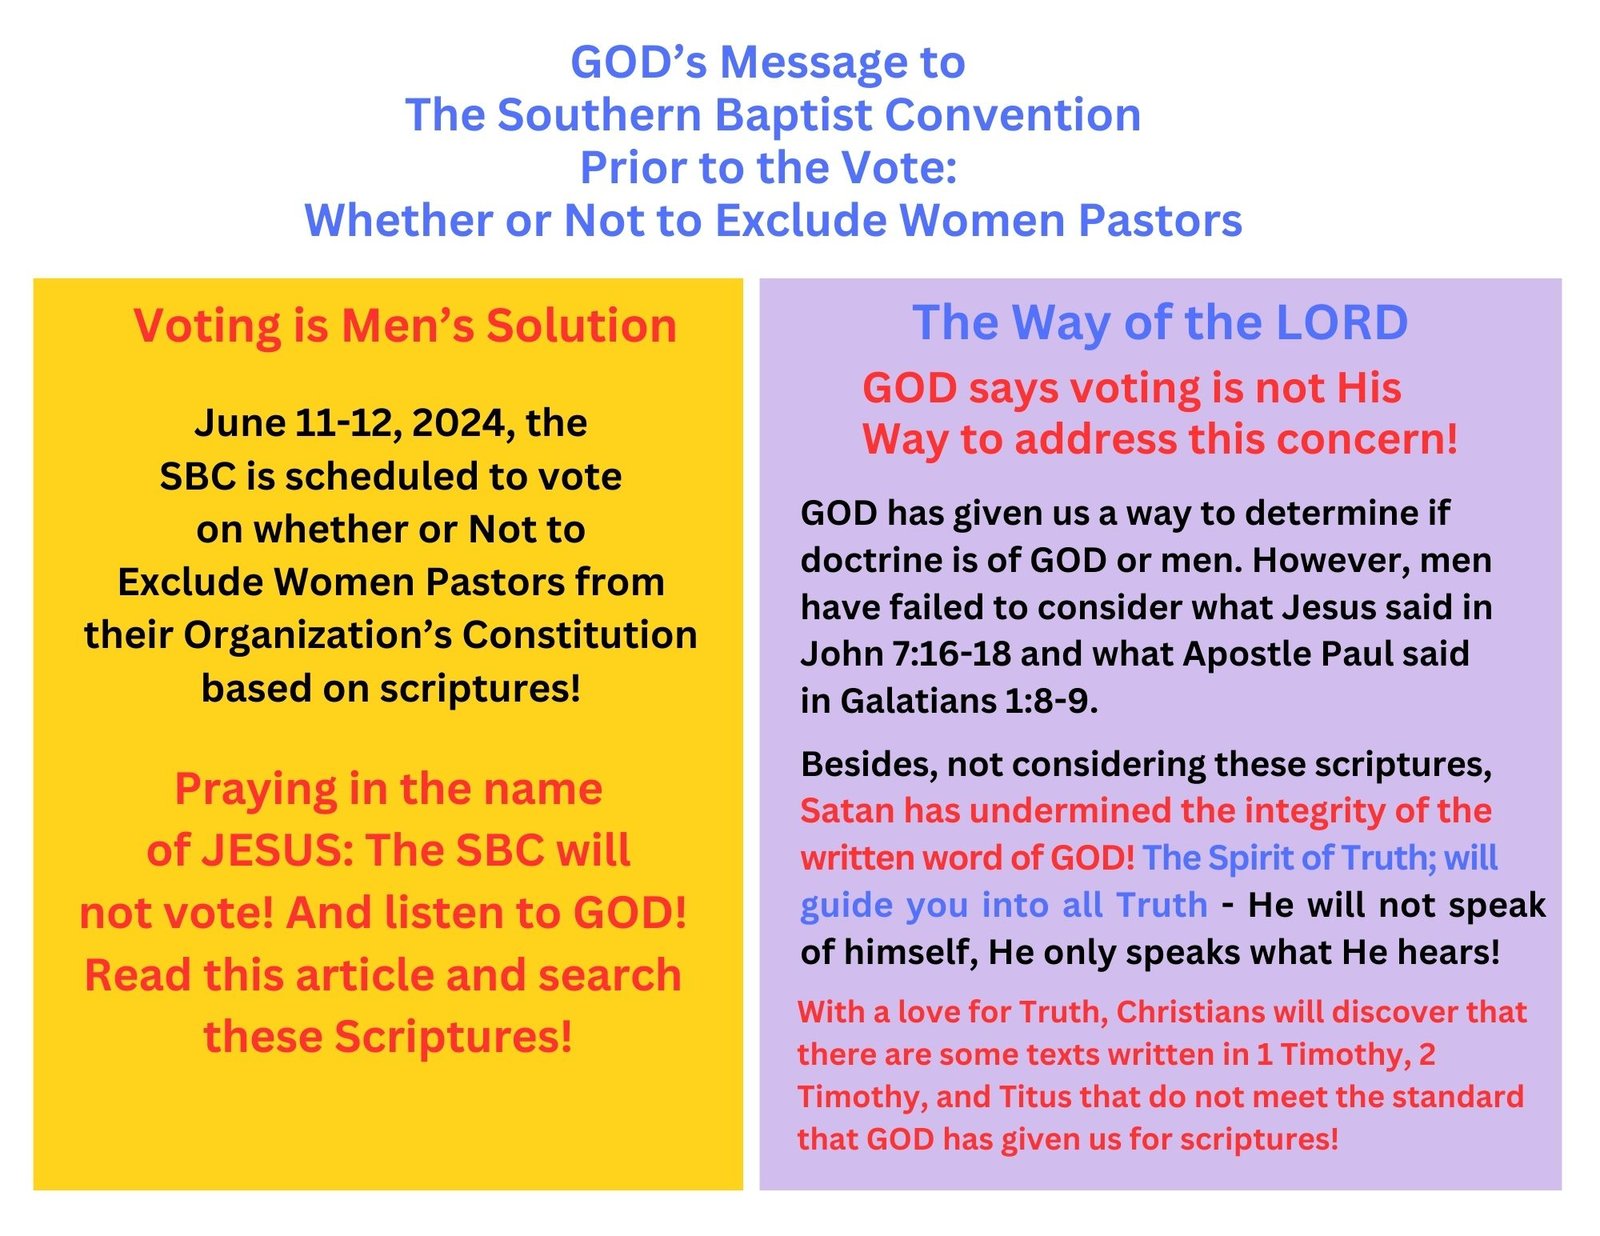 GOD is Warning the Southern Baptist Convention to Stop and Listen - Voting on this Issue is not the Way of the LORD!